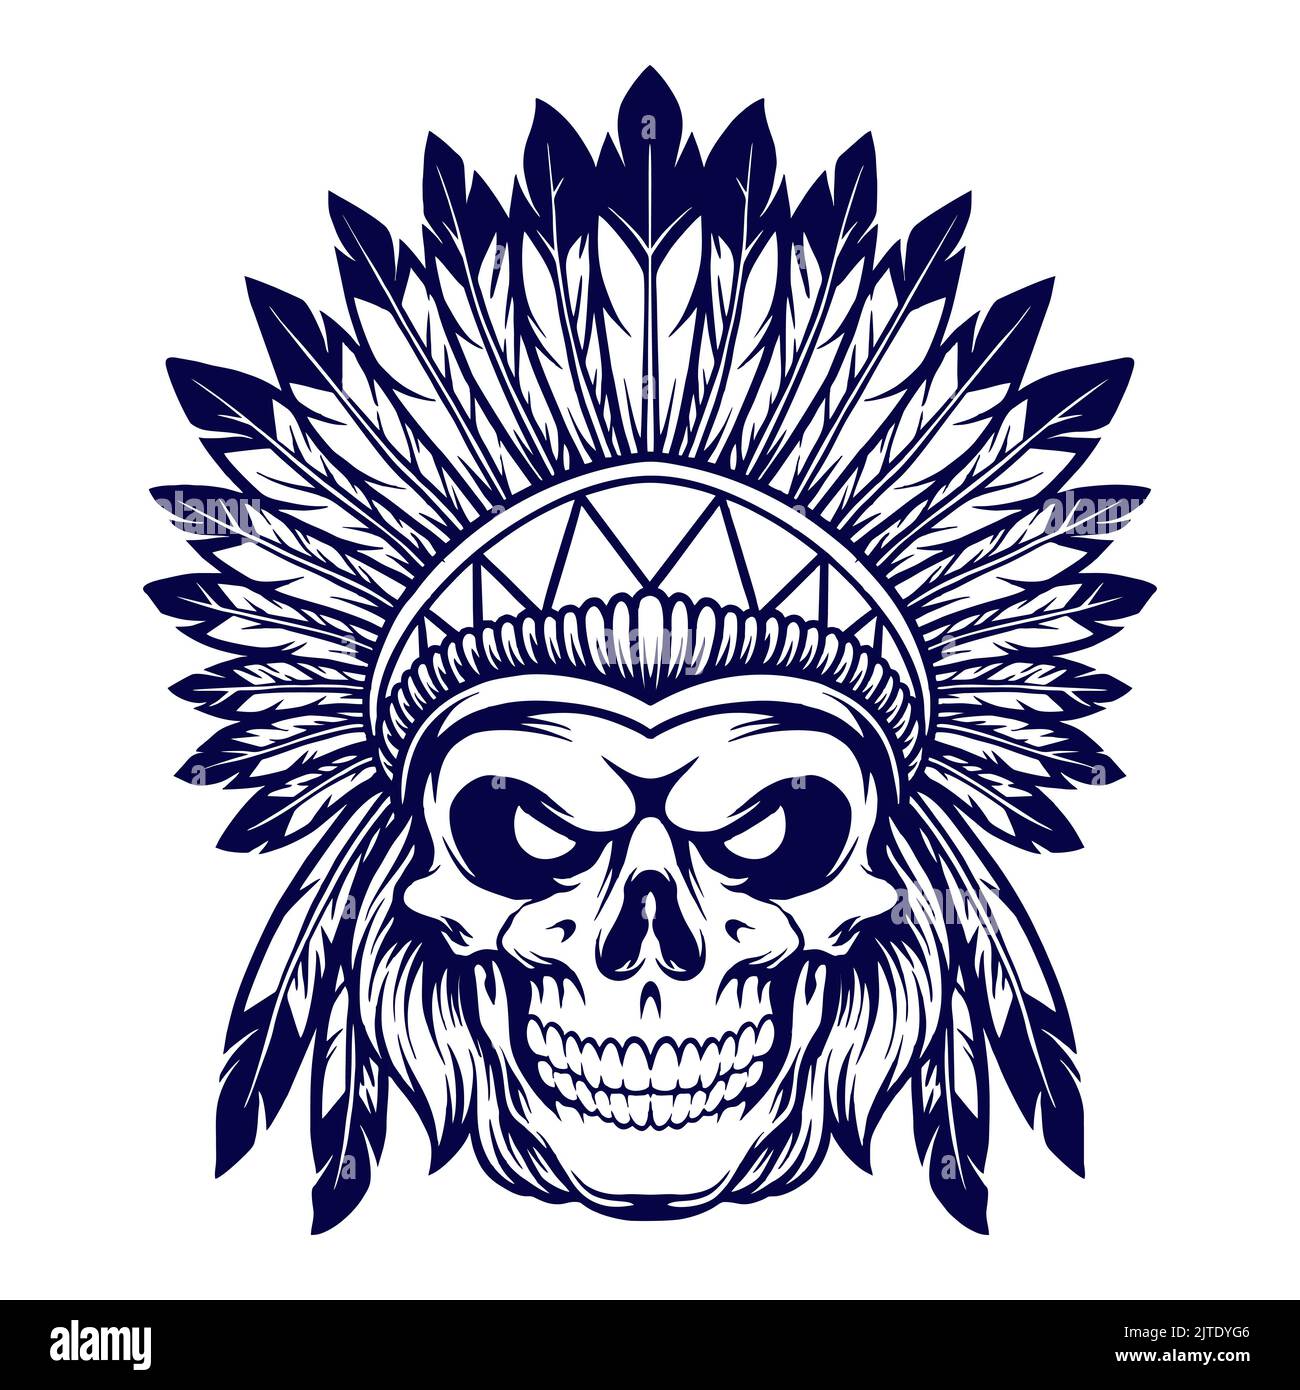 Indian headdress skull Cut Out Stock Images & Pictures - Alamy